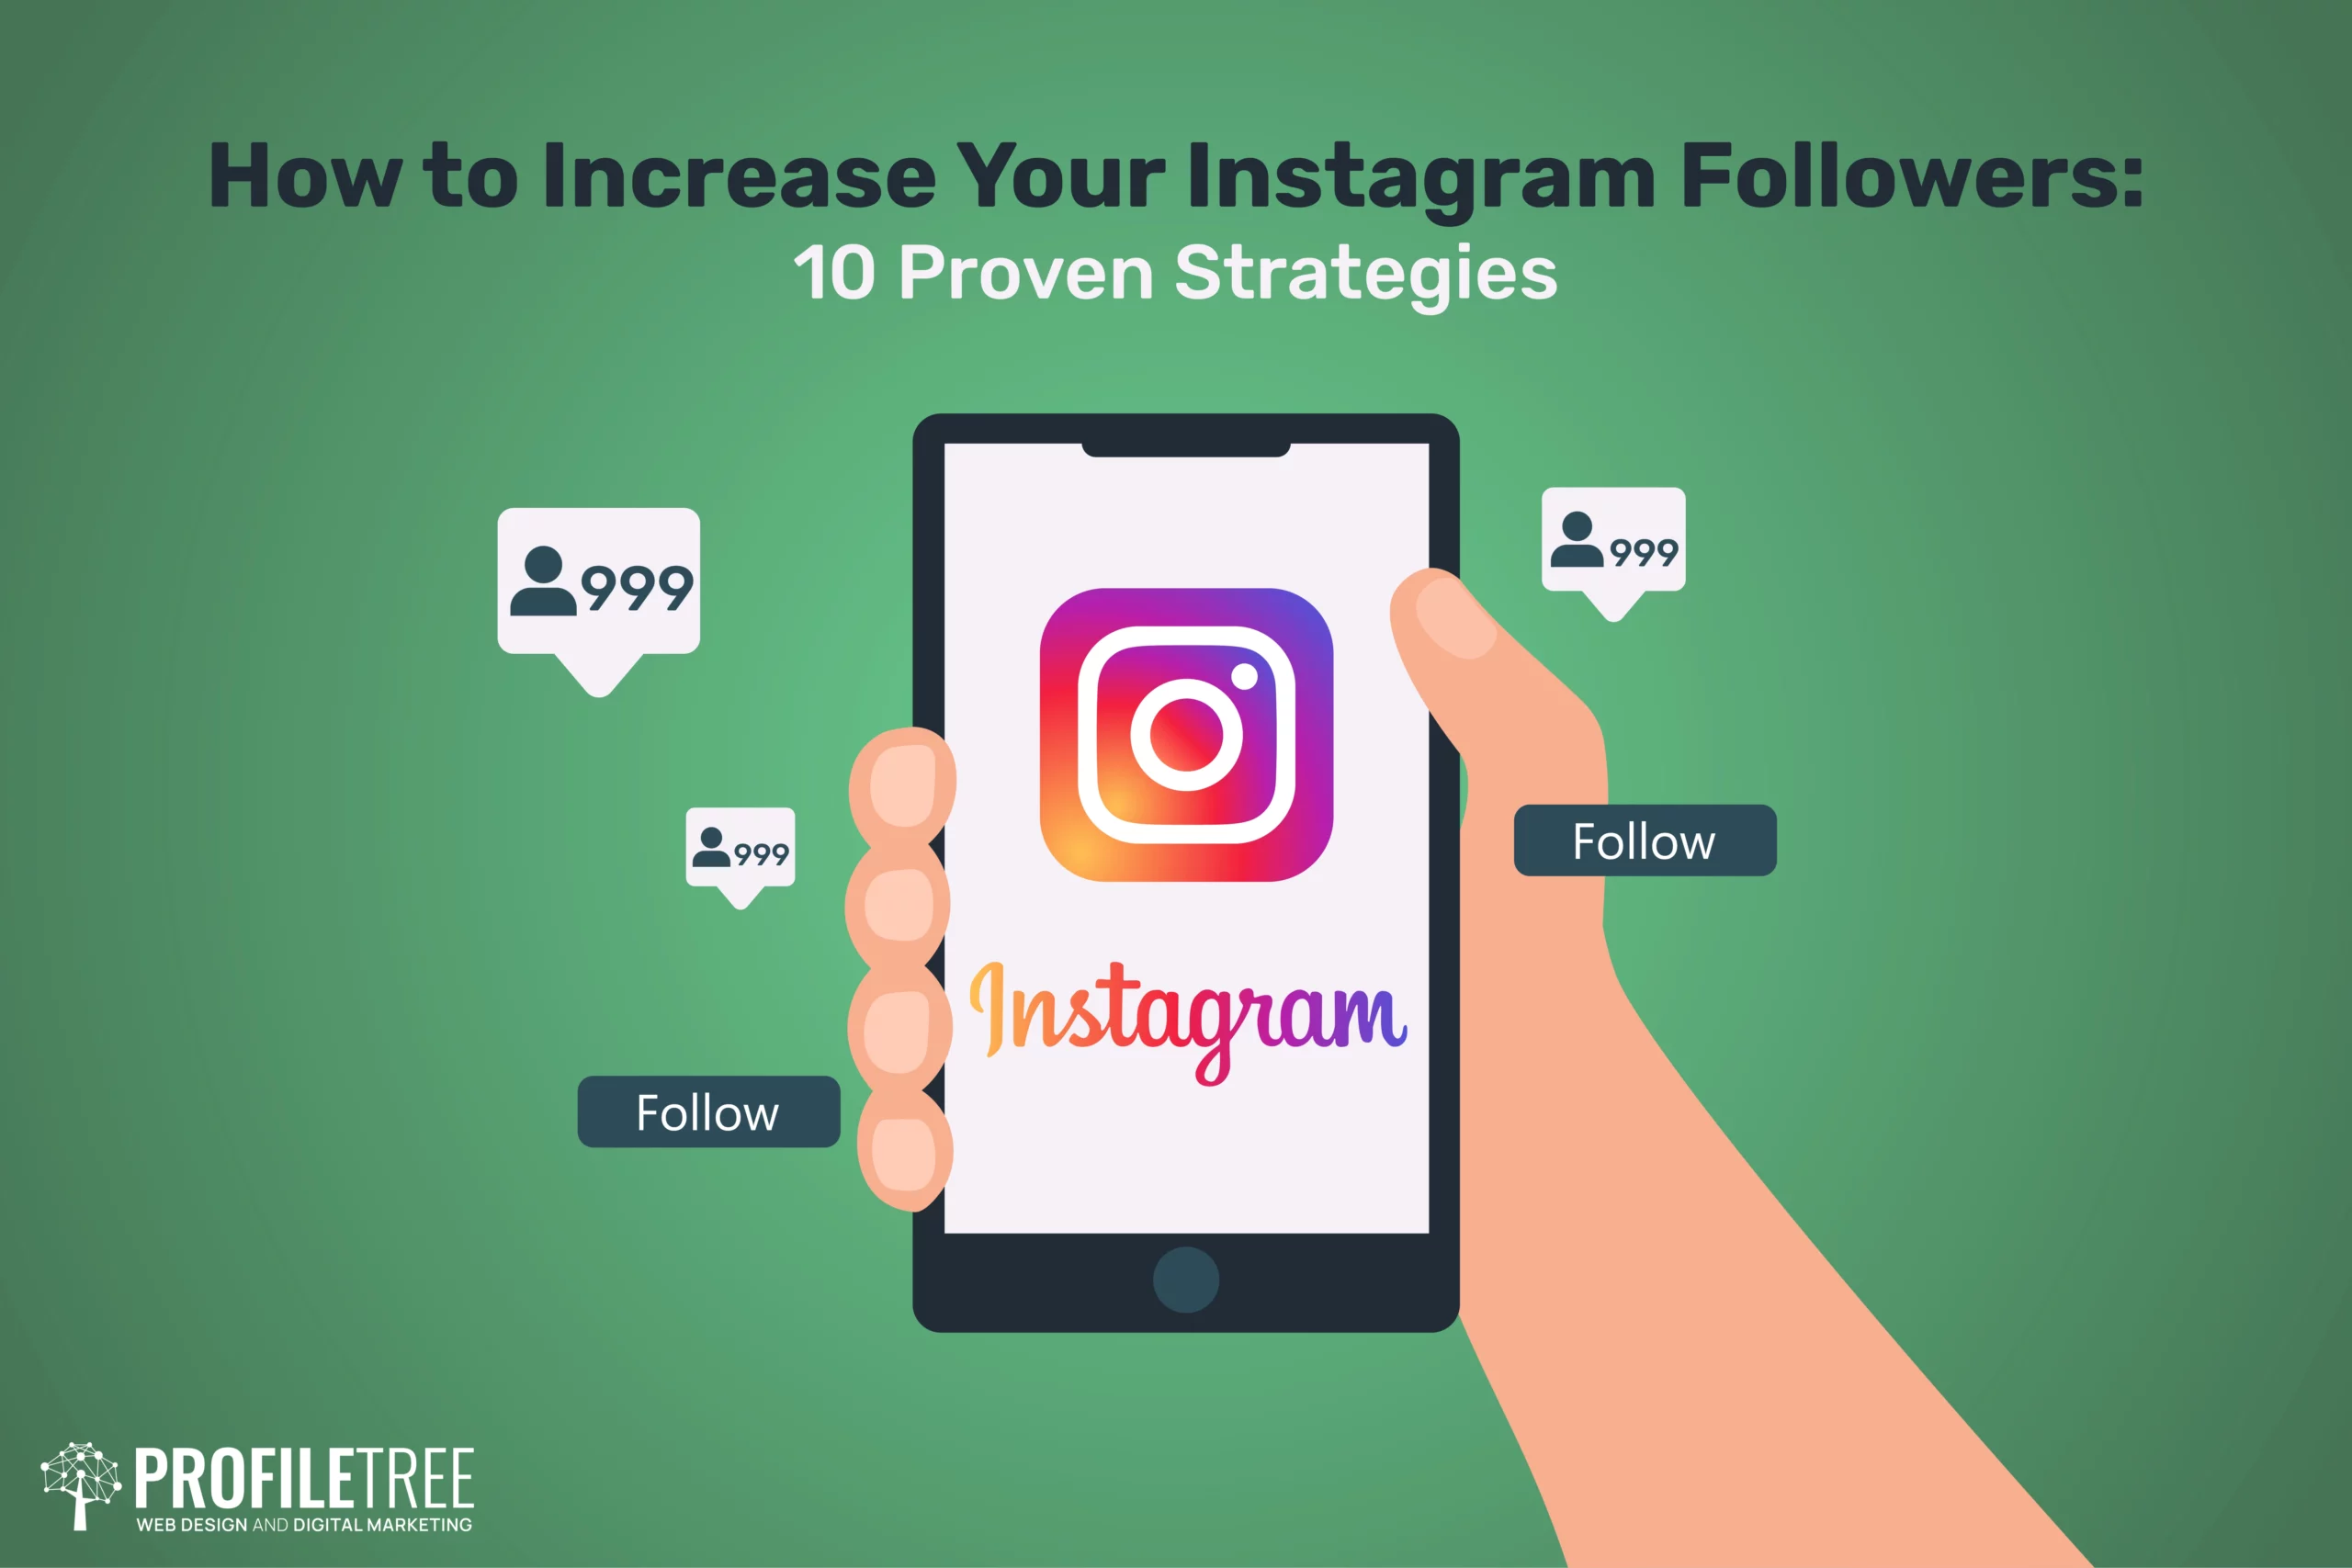 How to Increase Your Instagram Followers 10 Proven Strategies